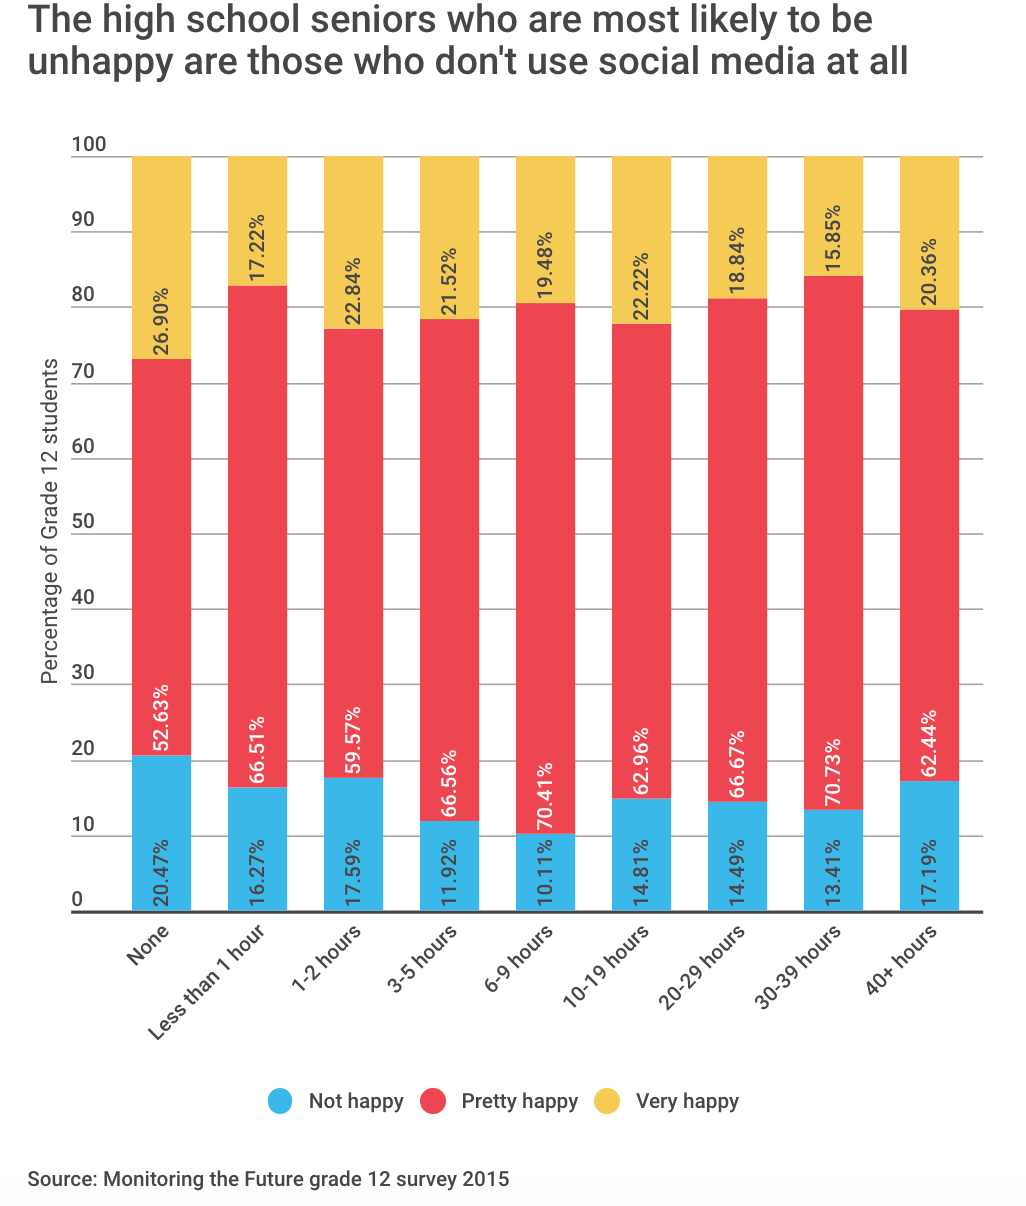 Column charts that shows happiness for grade 12 students who use social media for different amounts of time each week shows highest levels of "not happy" are reported by those who don't use social media at all.